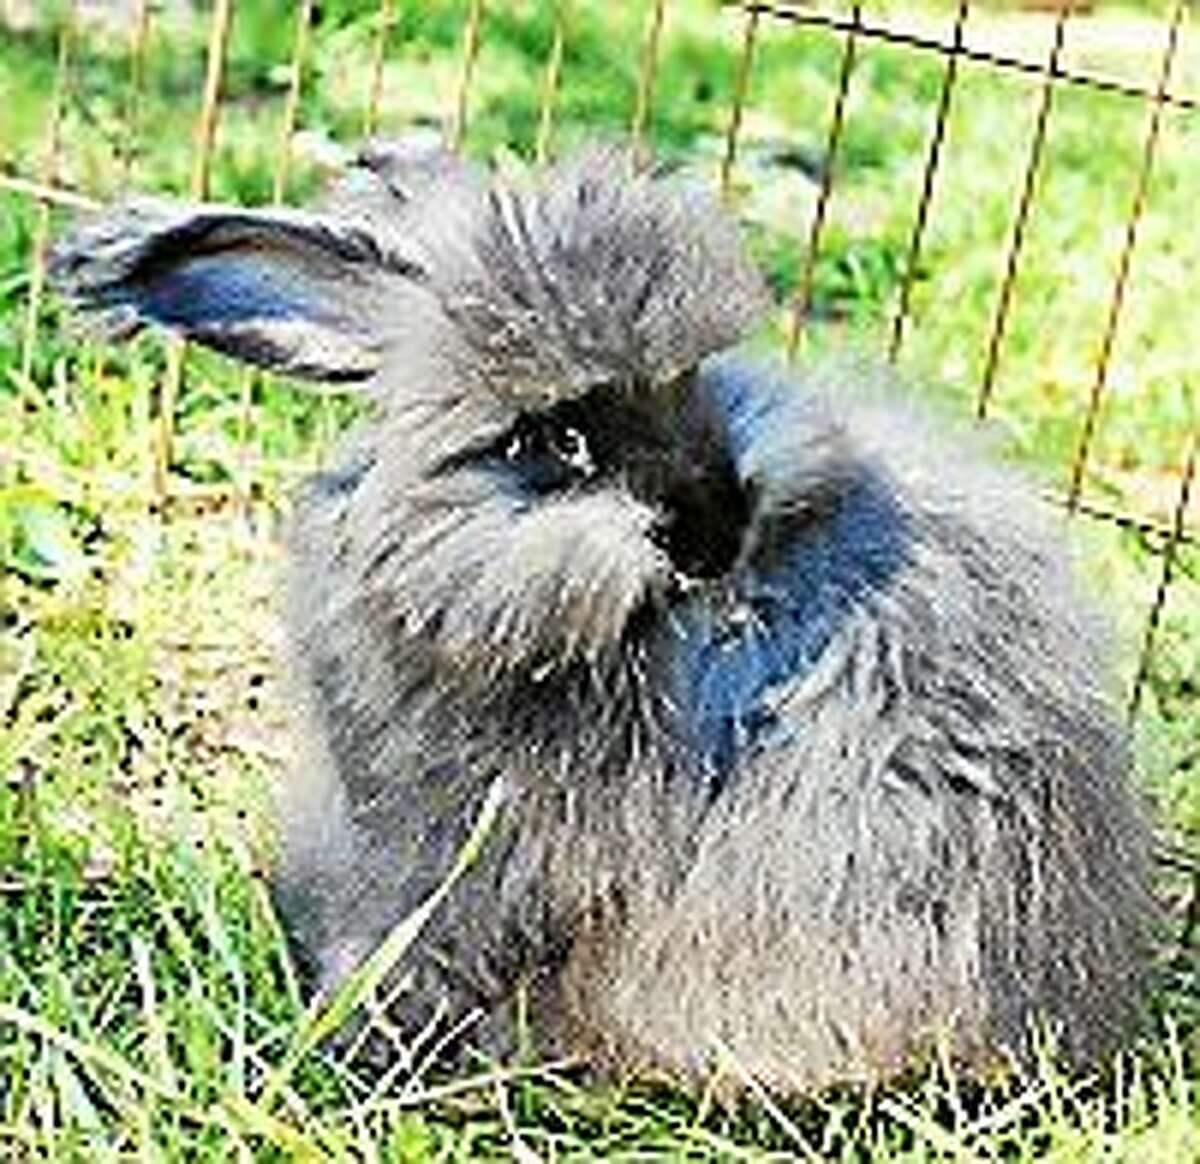 Contributed photo Easter bunnies will be making their appearance at In Sheep’s Clothing, this Saturday, April 4, from 10 a.m.-2 p.m. McKayla Ford, an agricultural student from Wamogo Regional High School, will bring some of the angora bunnies that she raises at home.